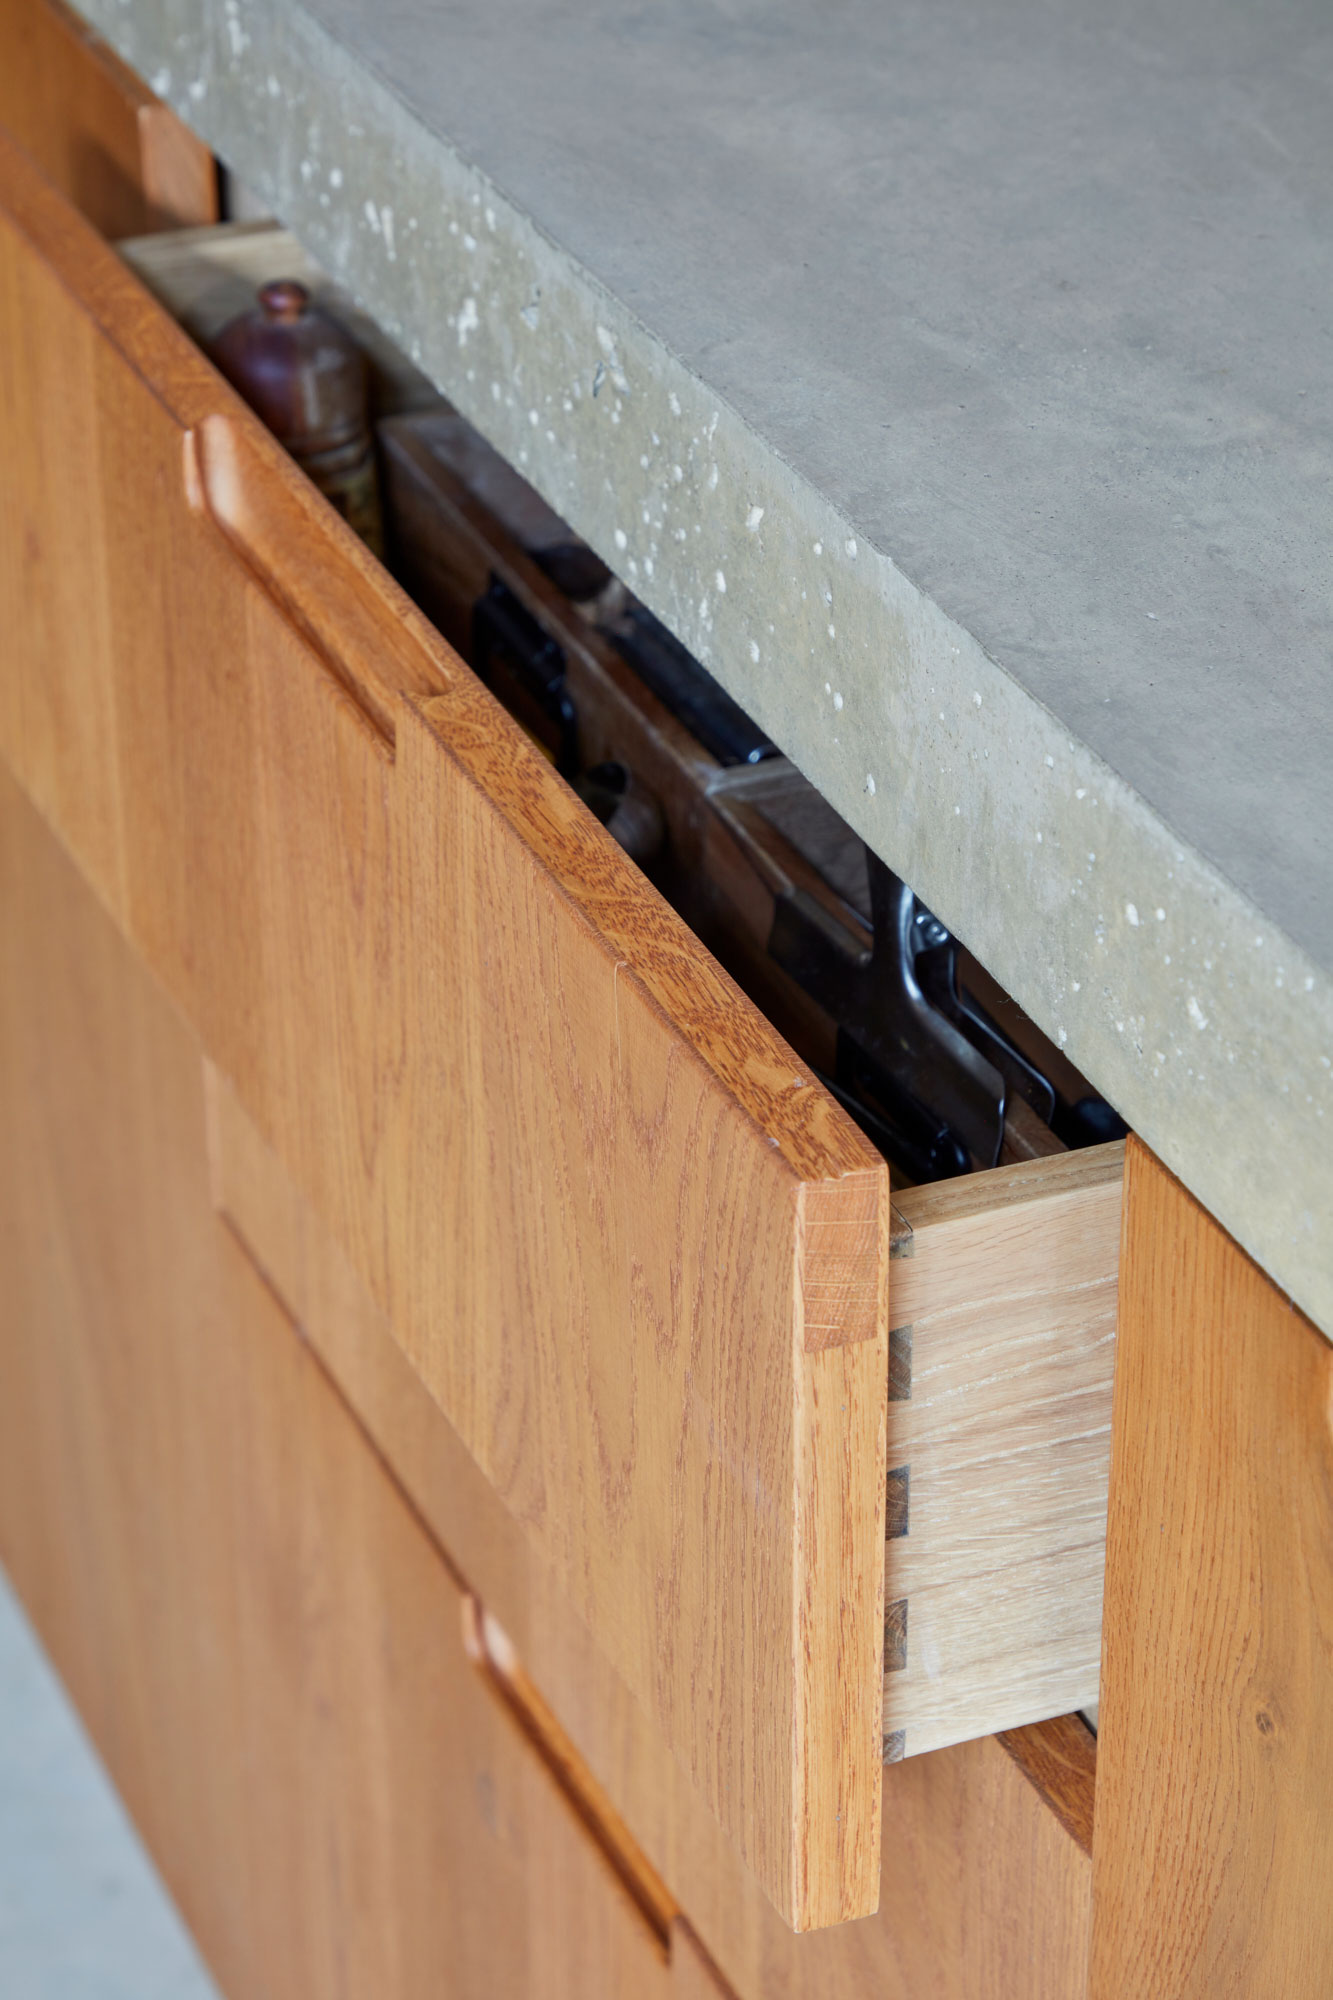 Handcrafted oak kitchen drawers with dovetail joints